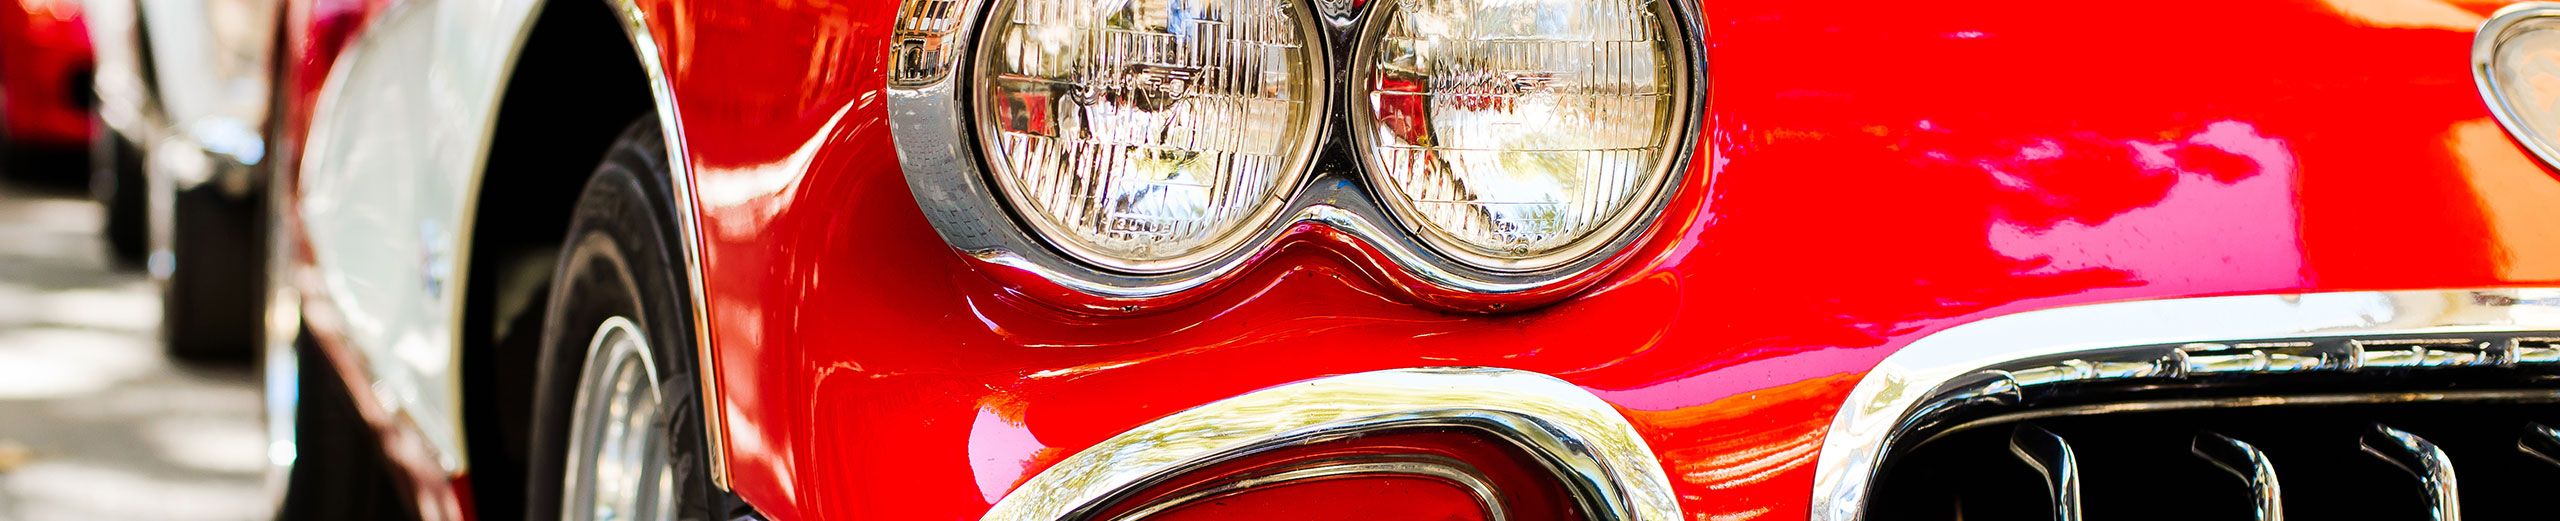 Knowing the value of your classic car